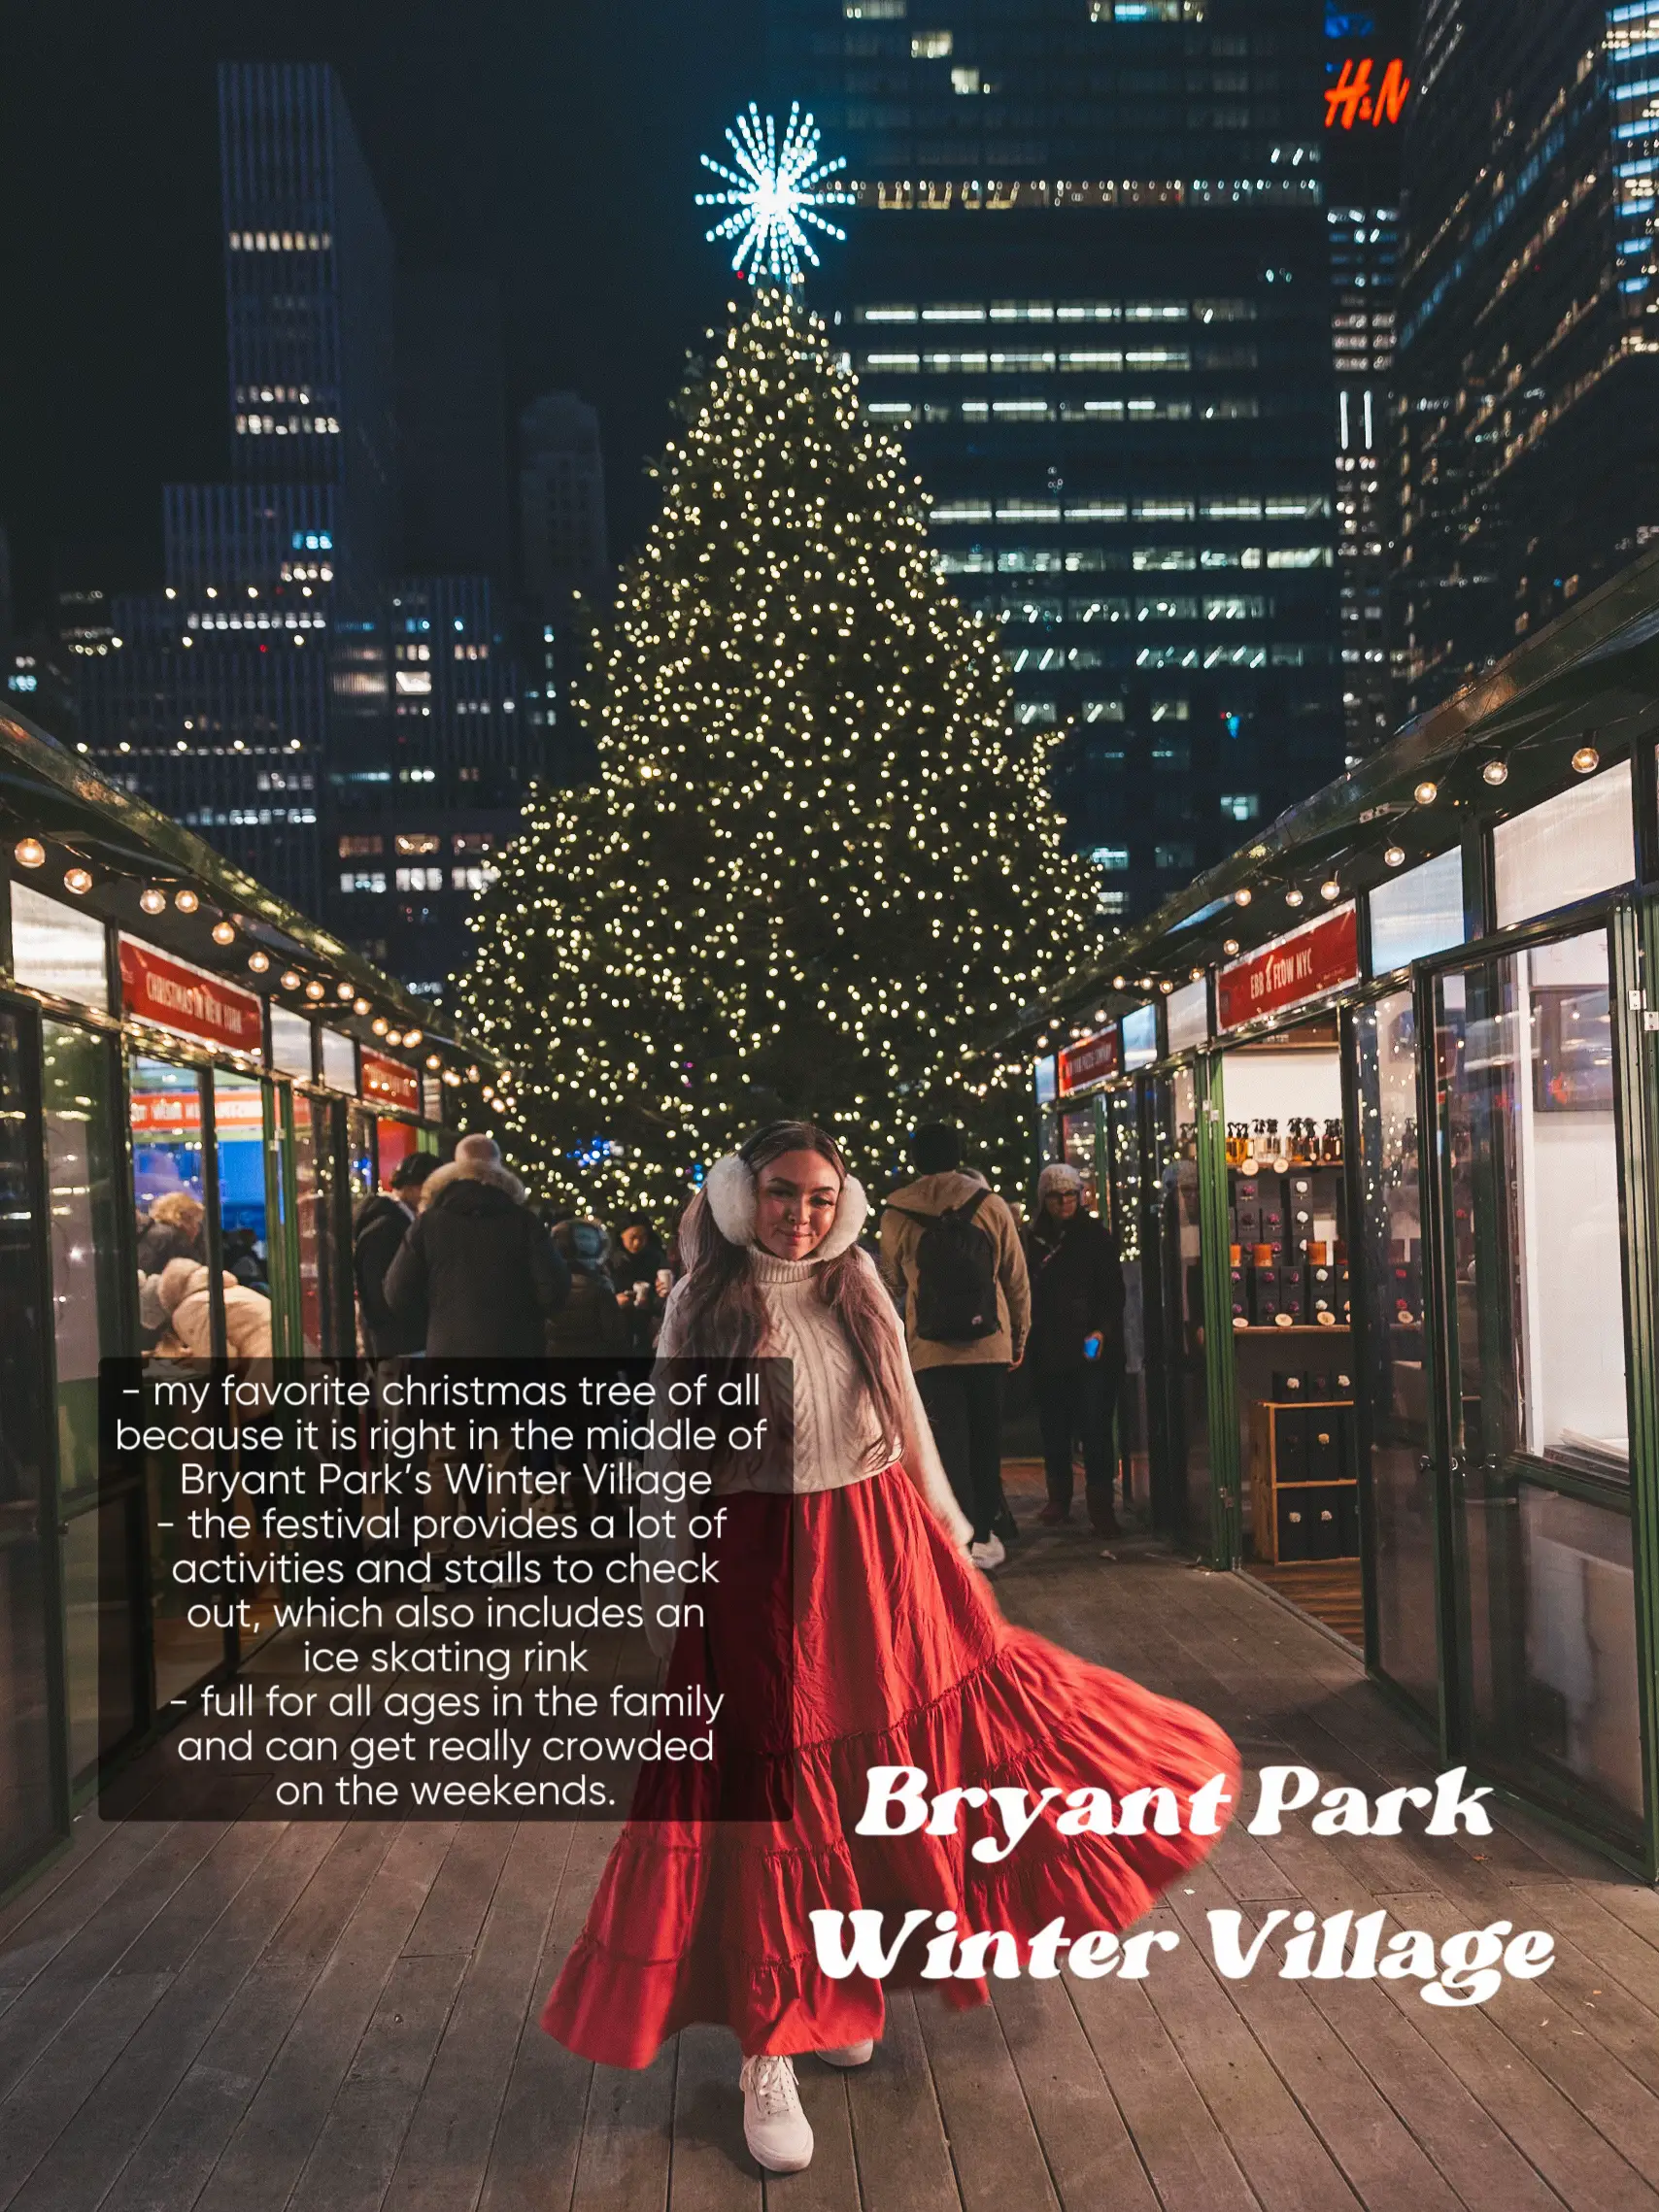  A woman is standing in front of a Christmas tree in Bryant Park Winter Village.